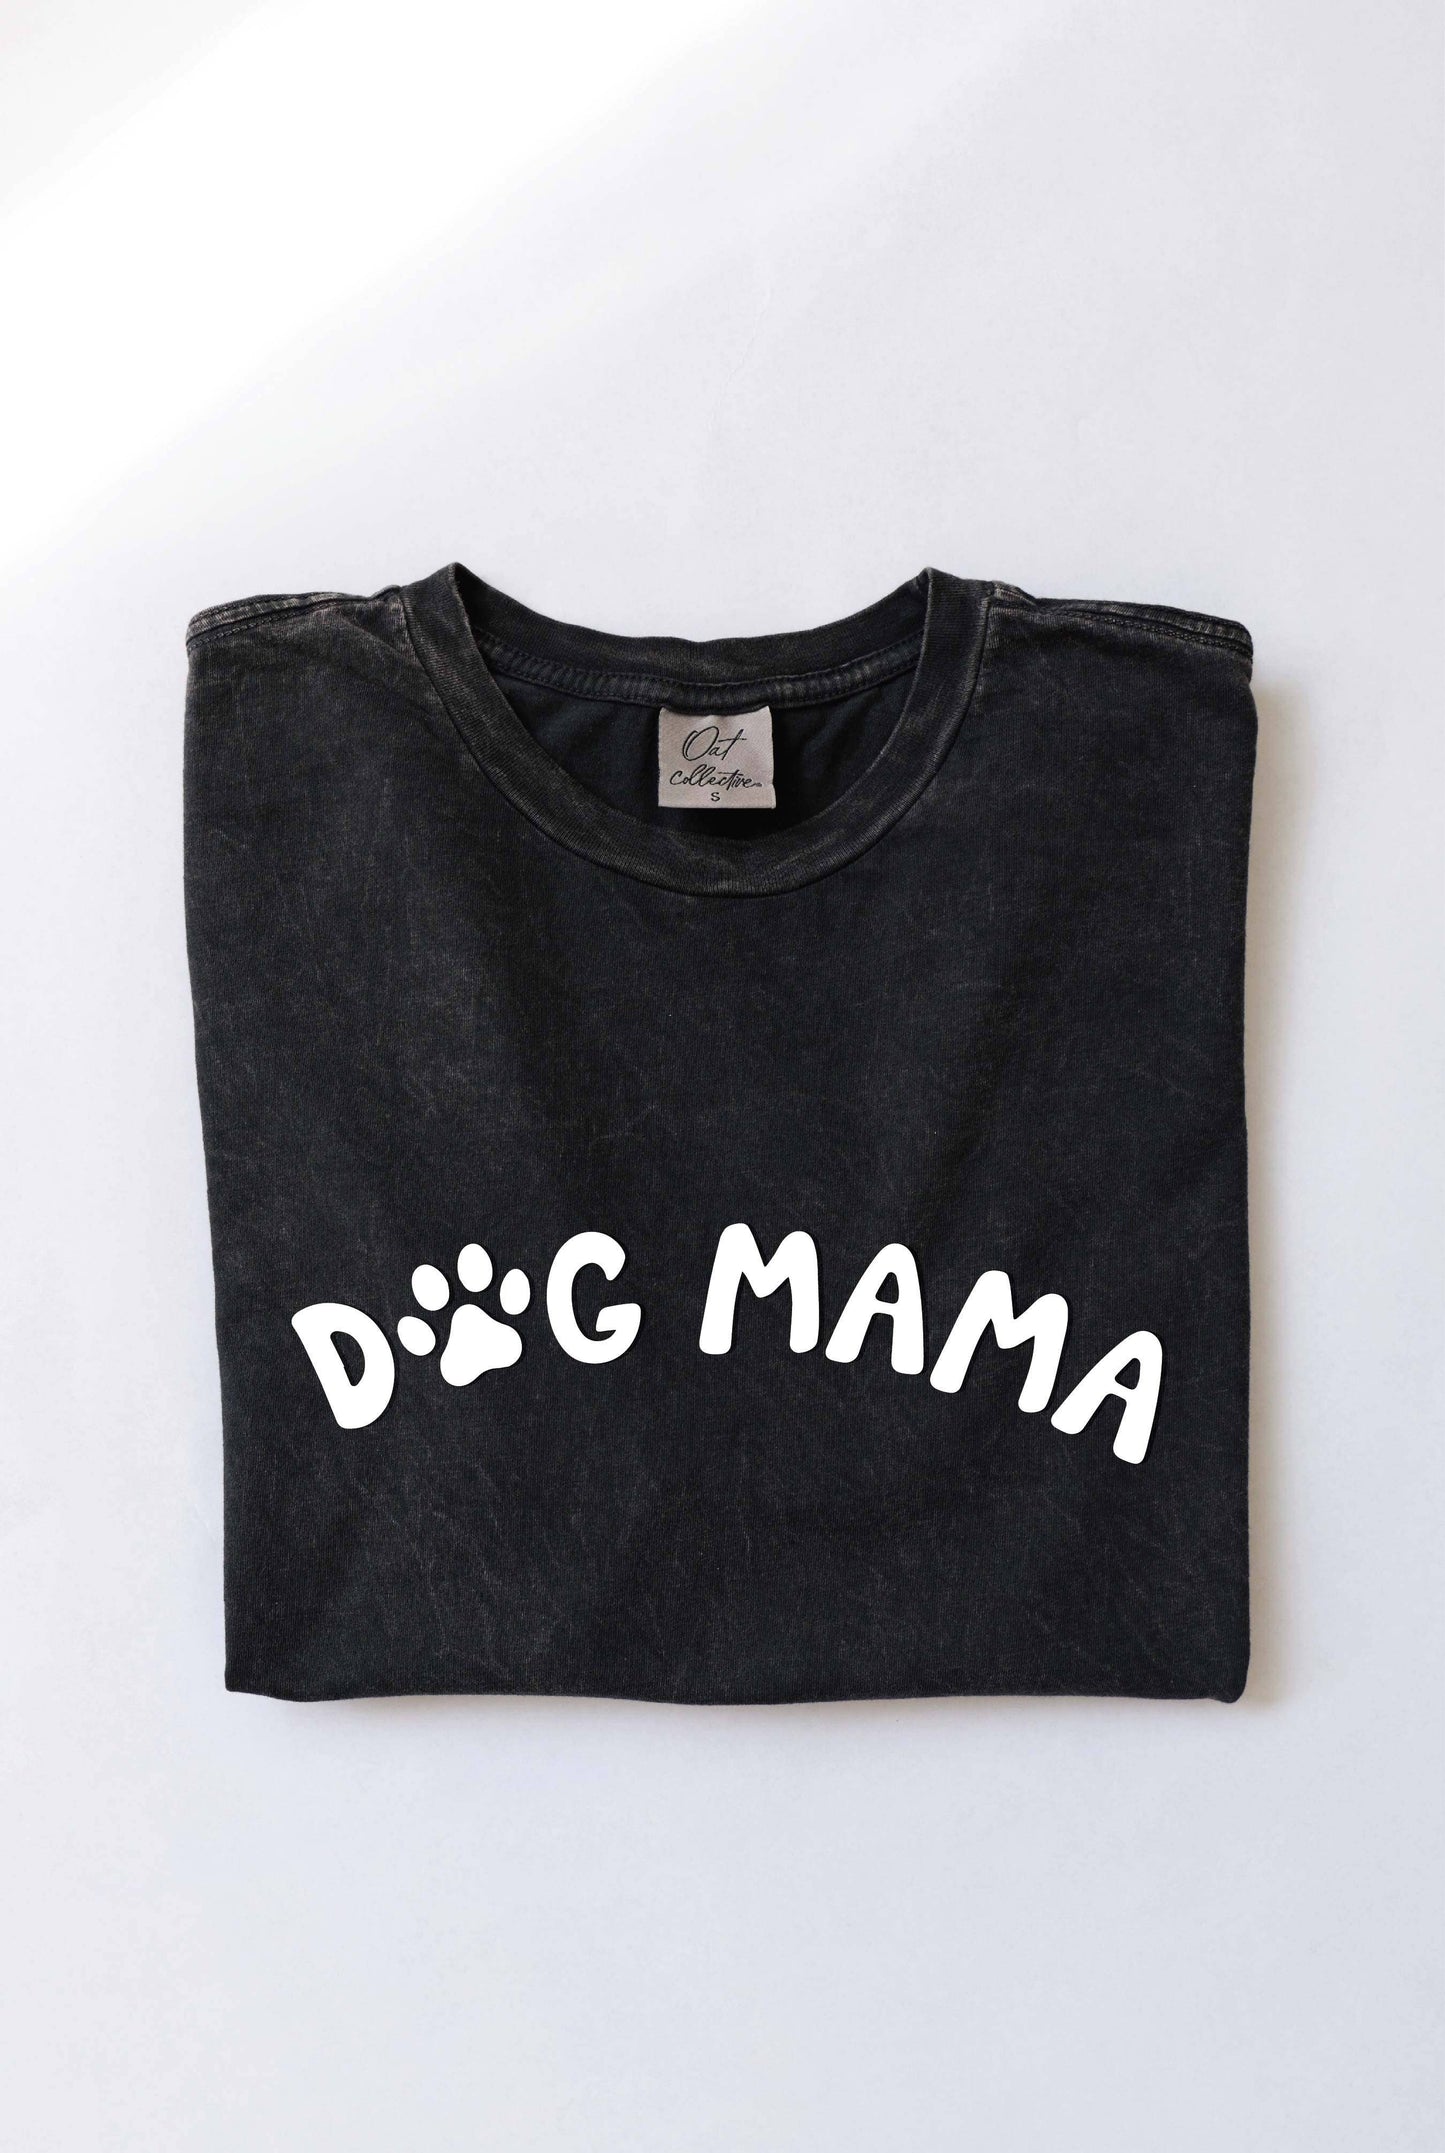 DOG MAMA Puff print Mineral Washed Graphic Top